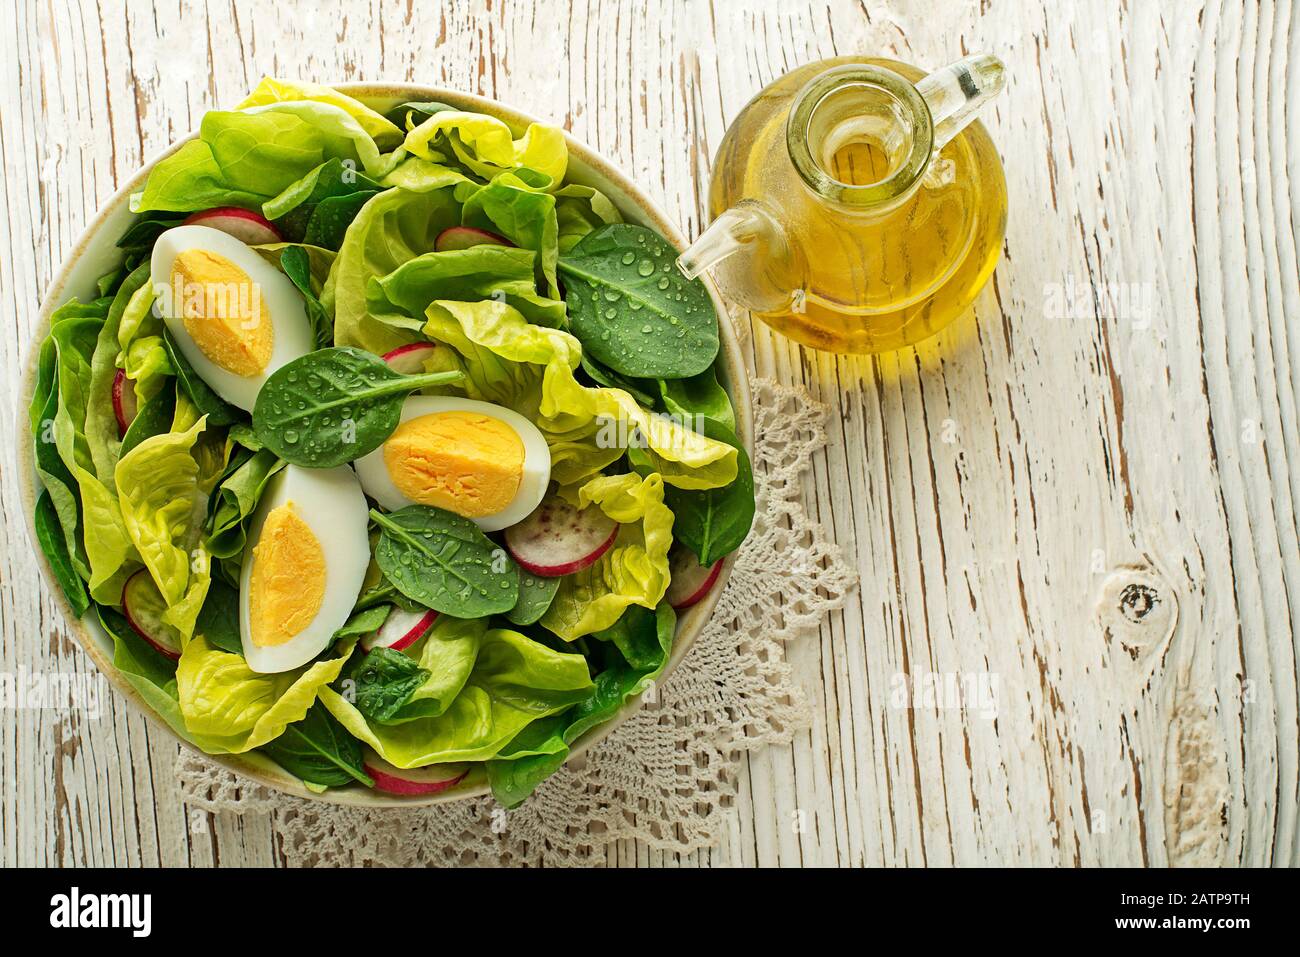 Healthy green salad with eggs on wooden table background. Healthy meal. Stock Photo